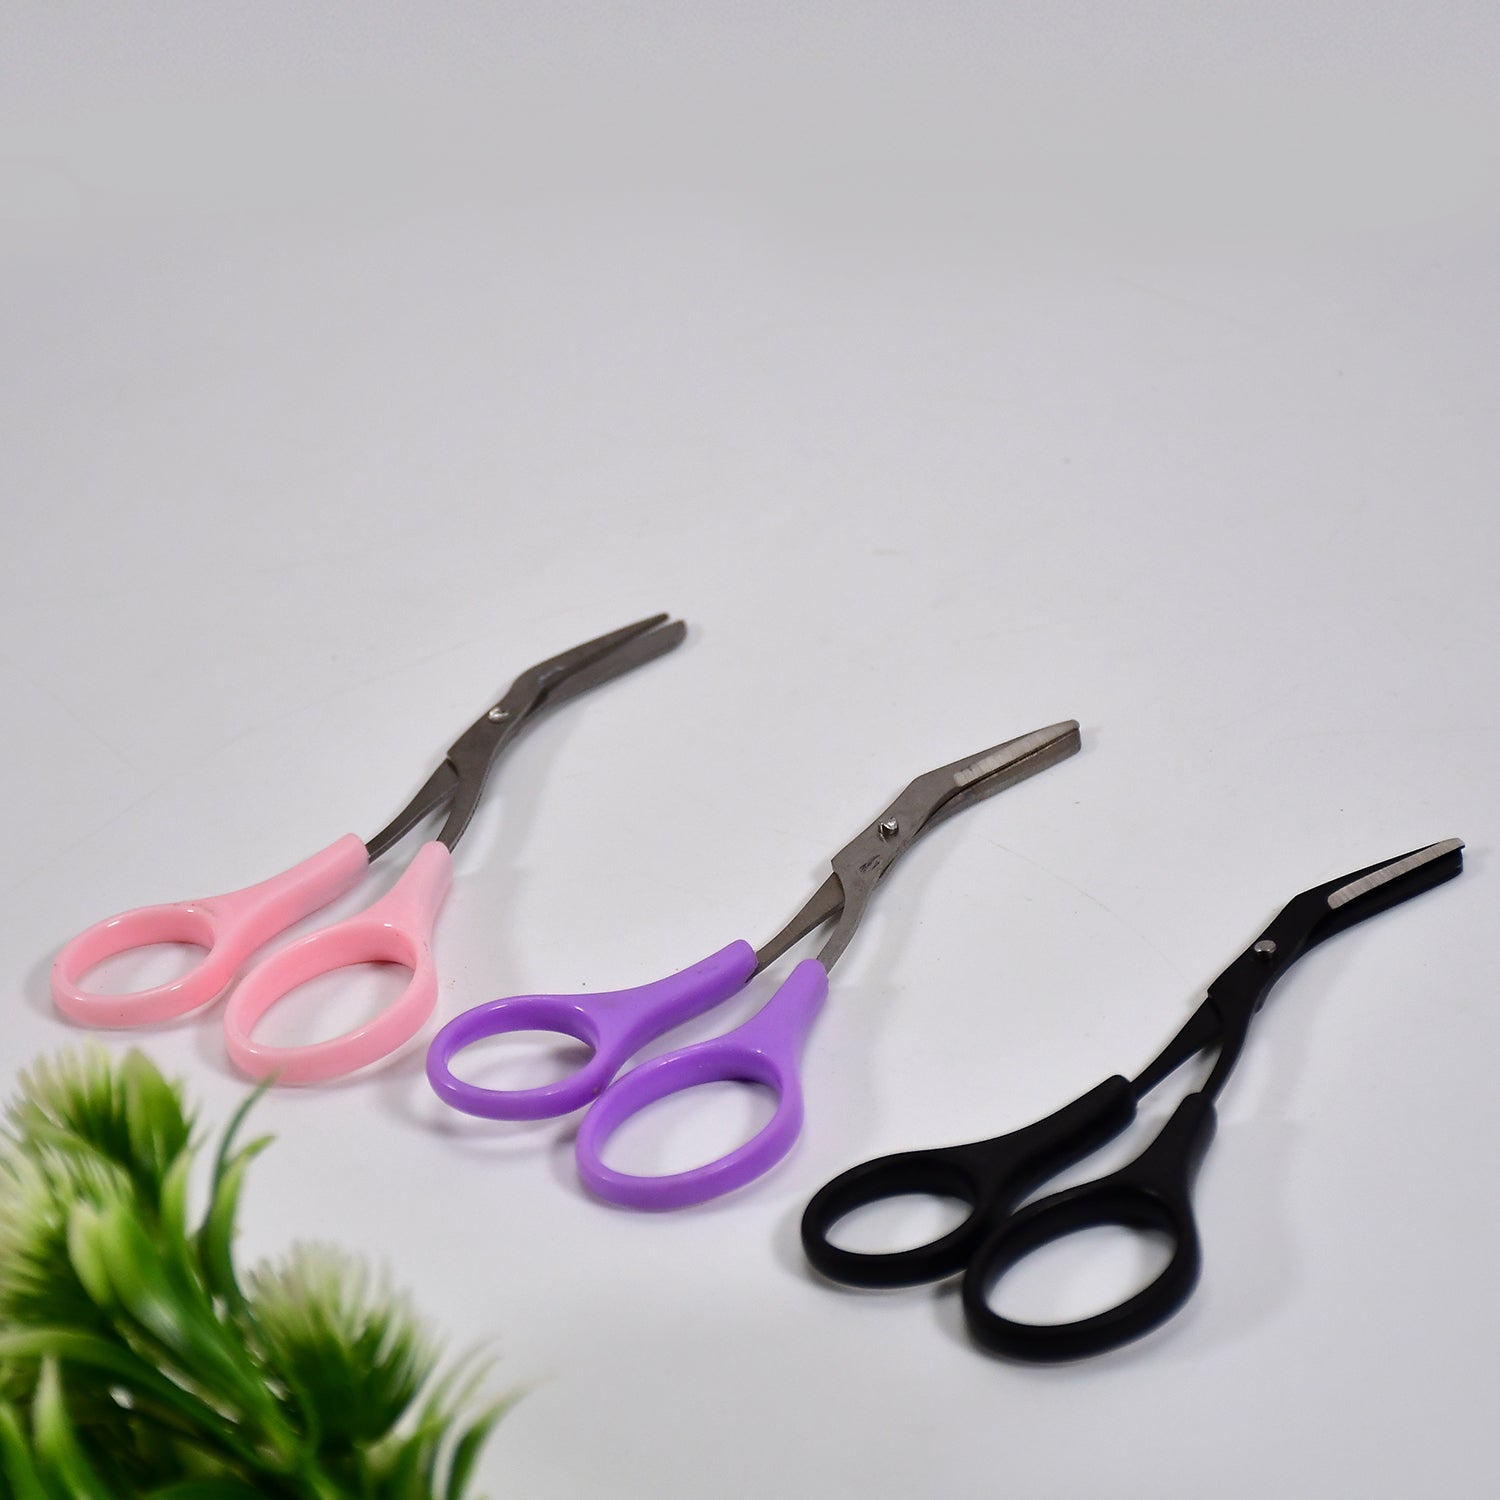 9118 Stainless Steel Eyebrow Grooming Shear Scissors, Hair Removal Shaper Shaping Tool Makeup Beauty Accessories for Men and Women 